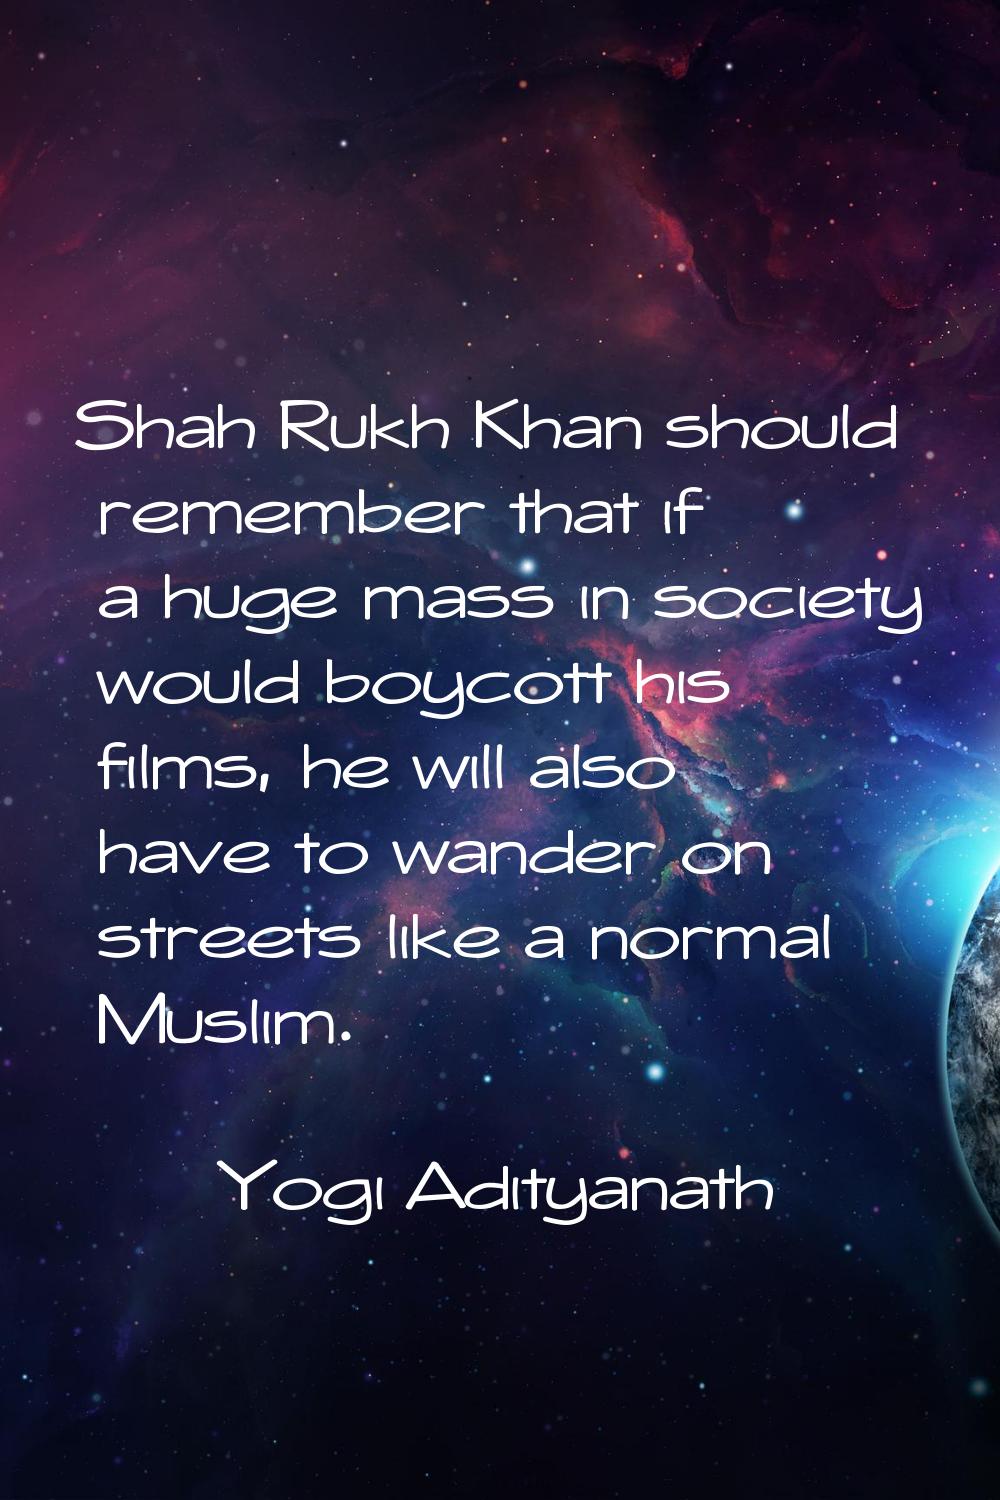 Shah Rukh Khan should remember that if a huge mass in society would boycott his films, he will also